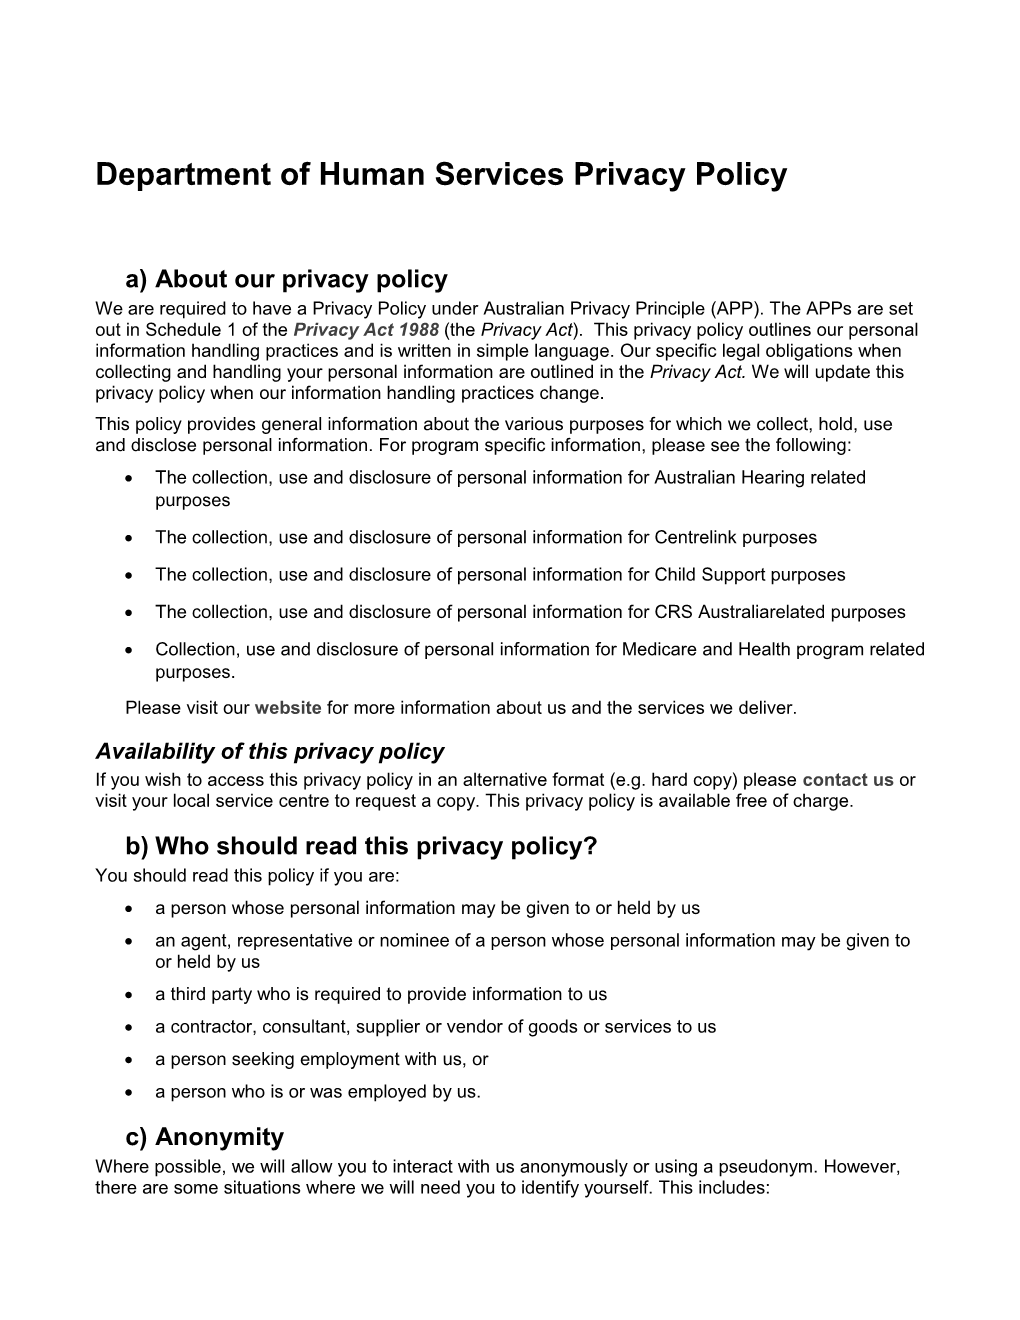 DHS Privacy Policy